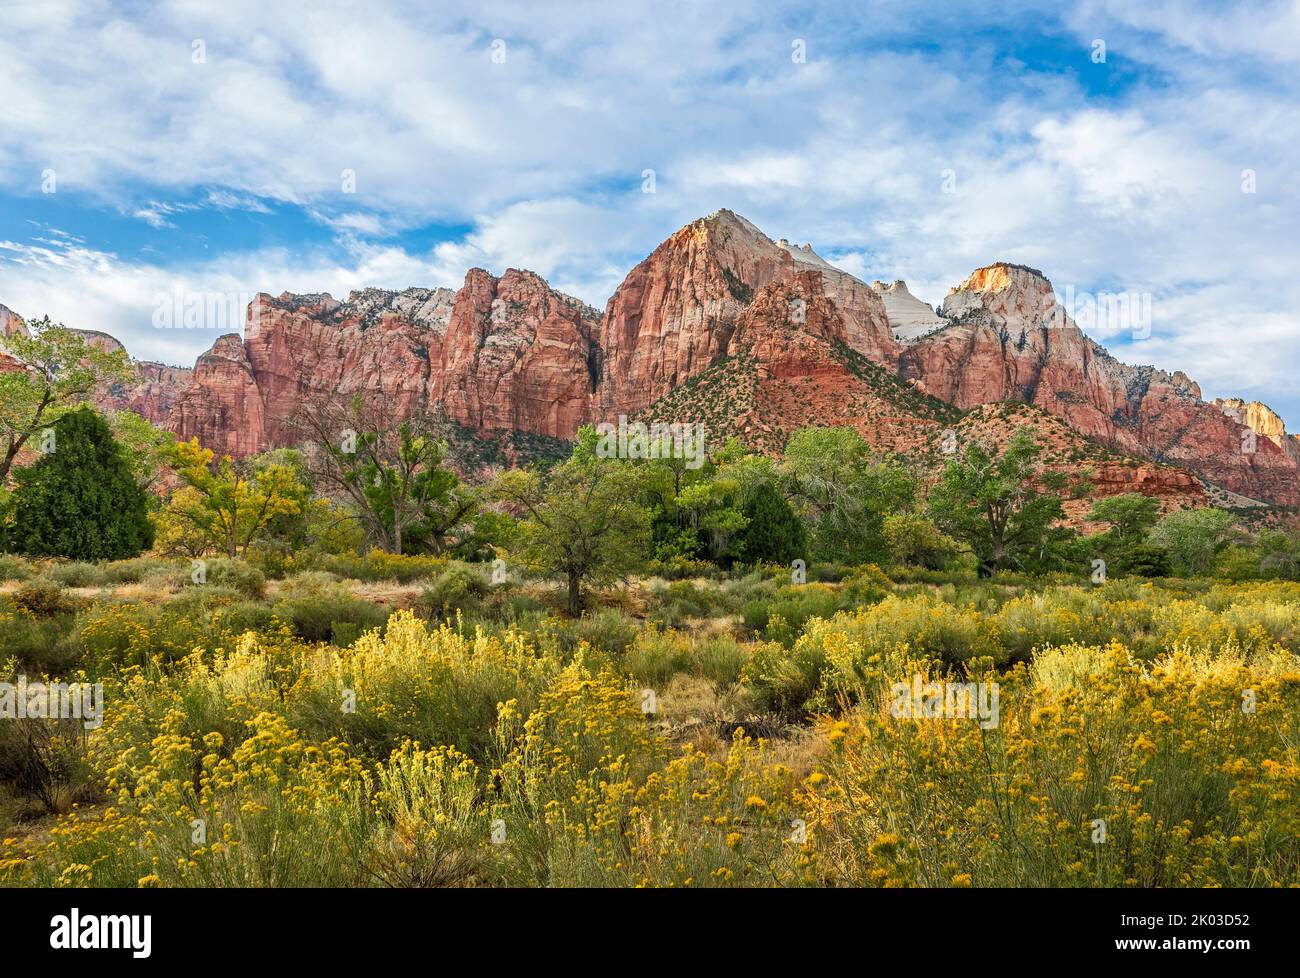 Zion National Park is located in southwestern Utah on the border with Arizona. It has an area of 579 kö² and lies between 1128 m and 2660 m altitude. Landscape at the Pa'rus Trail. Right The Sentinel Stock Photo